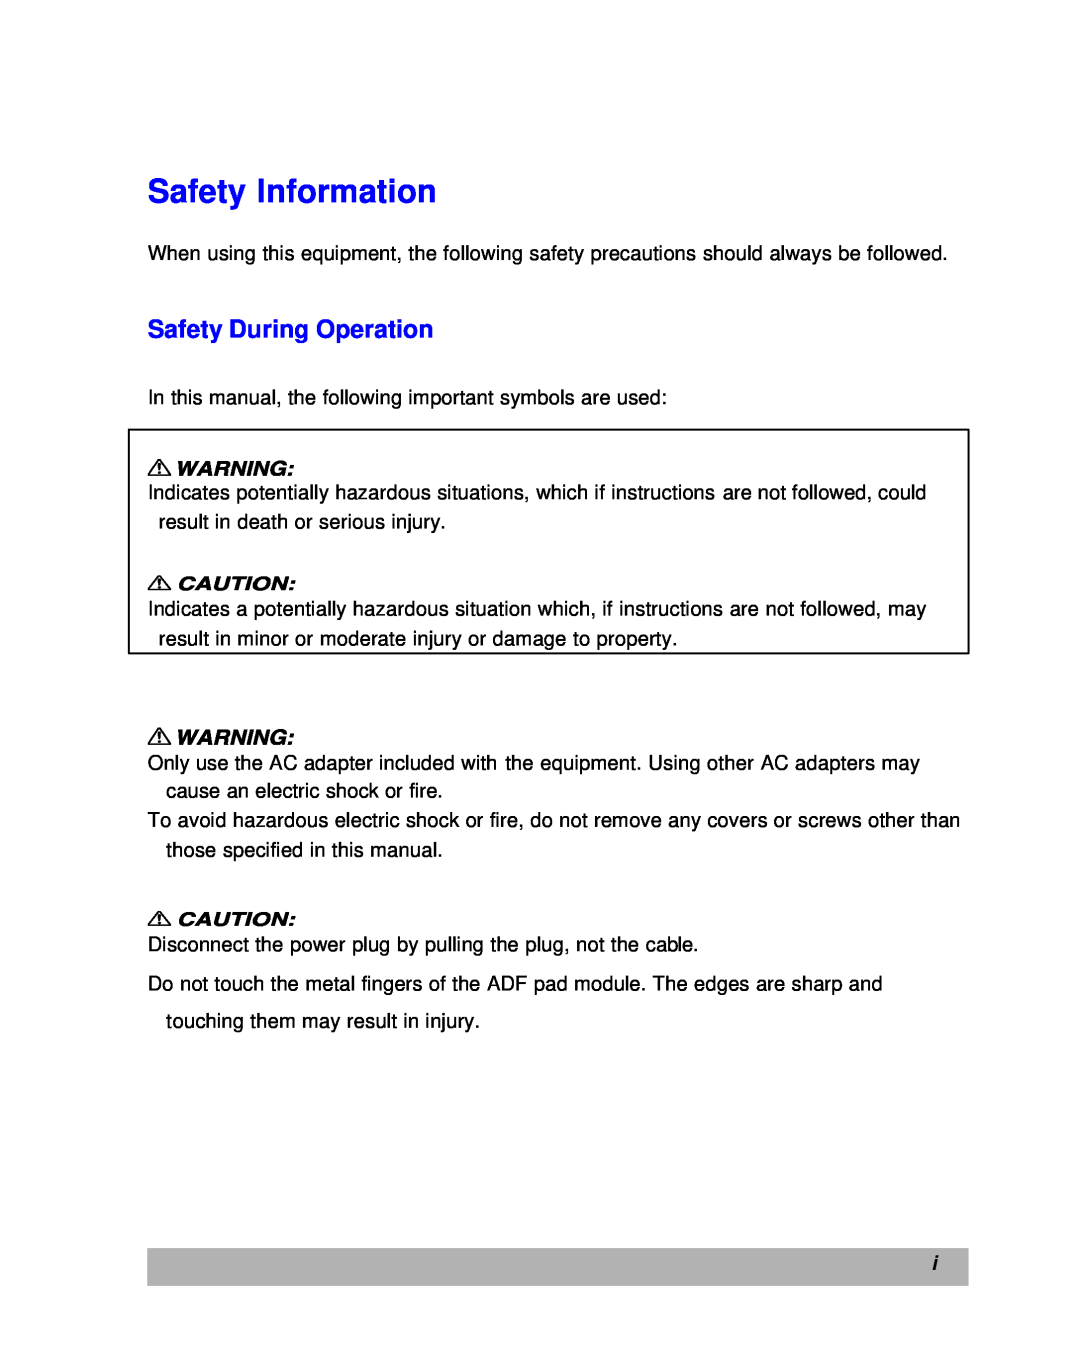 Lanier IS100e manual Safety During Operation, Safety Information 